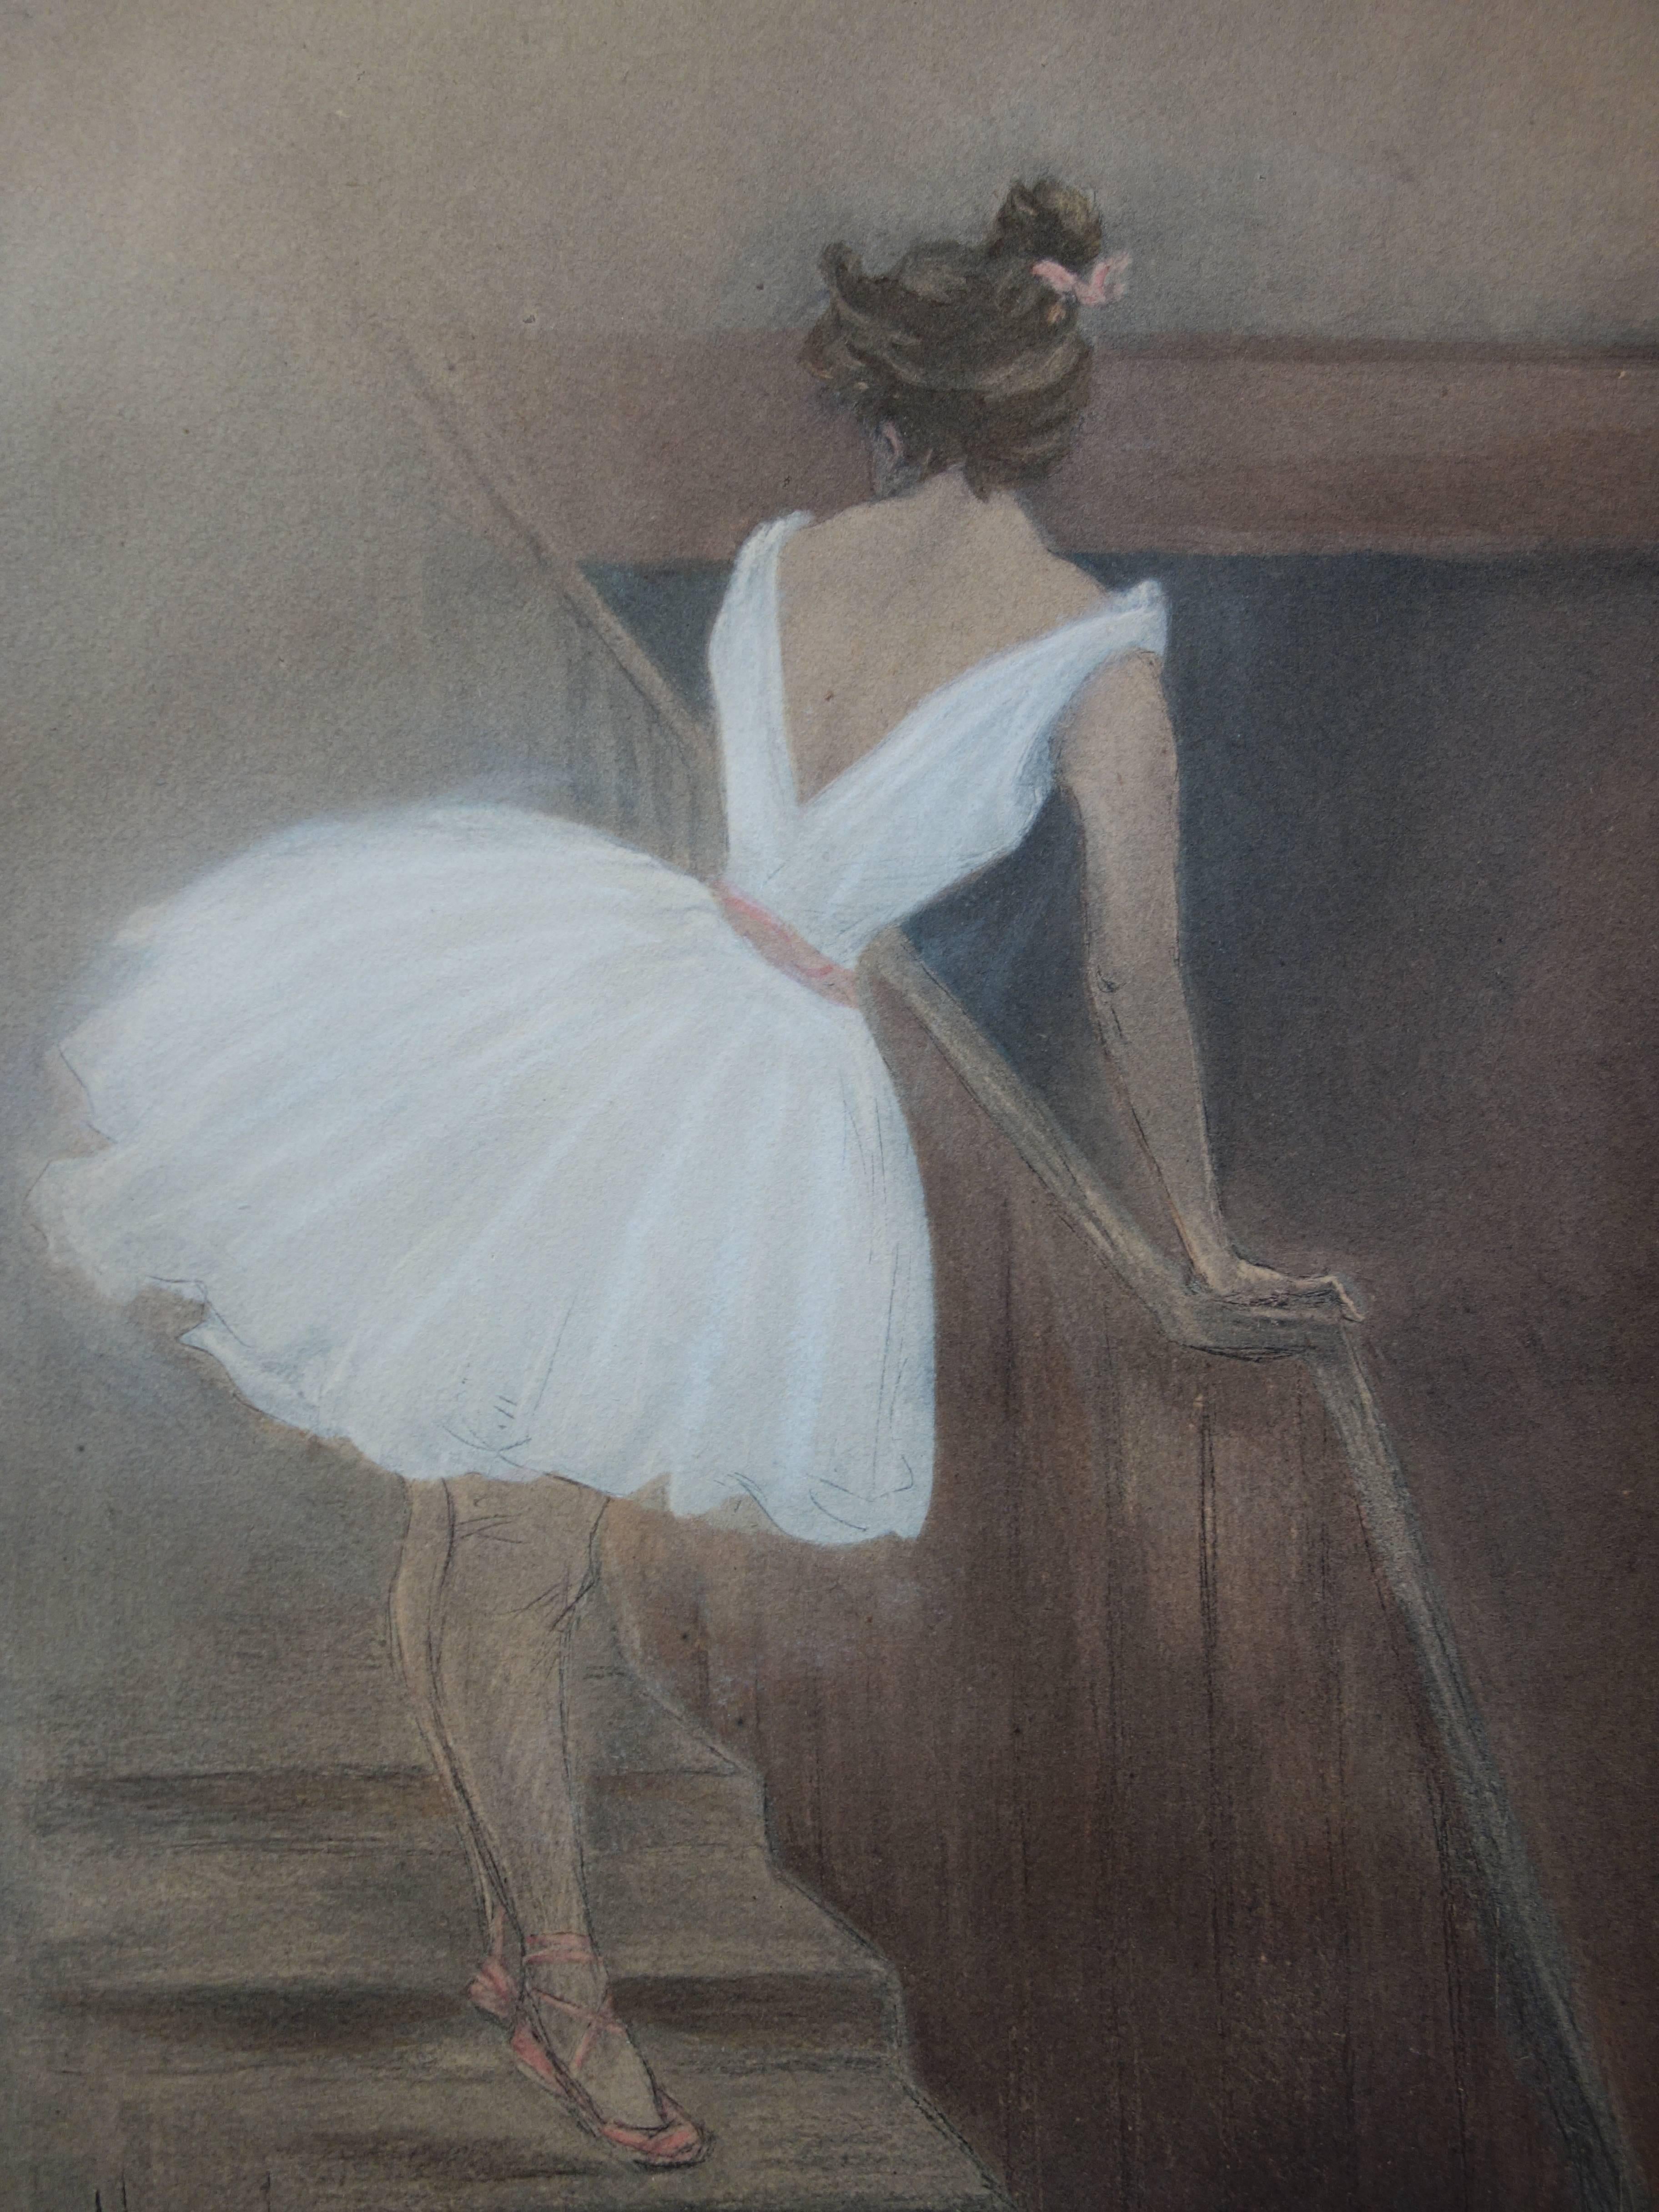 Ballerina in the Stairs - Original lithograph (1897/98) - Gray Figurative Print by Henri Boutet